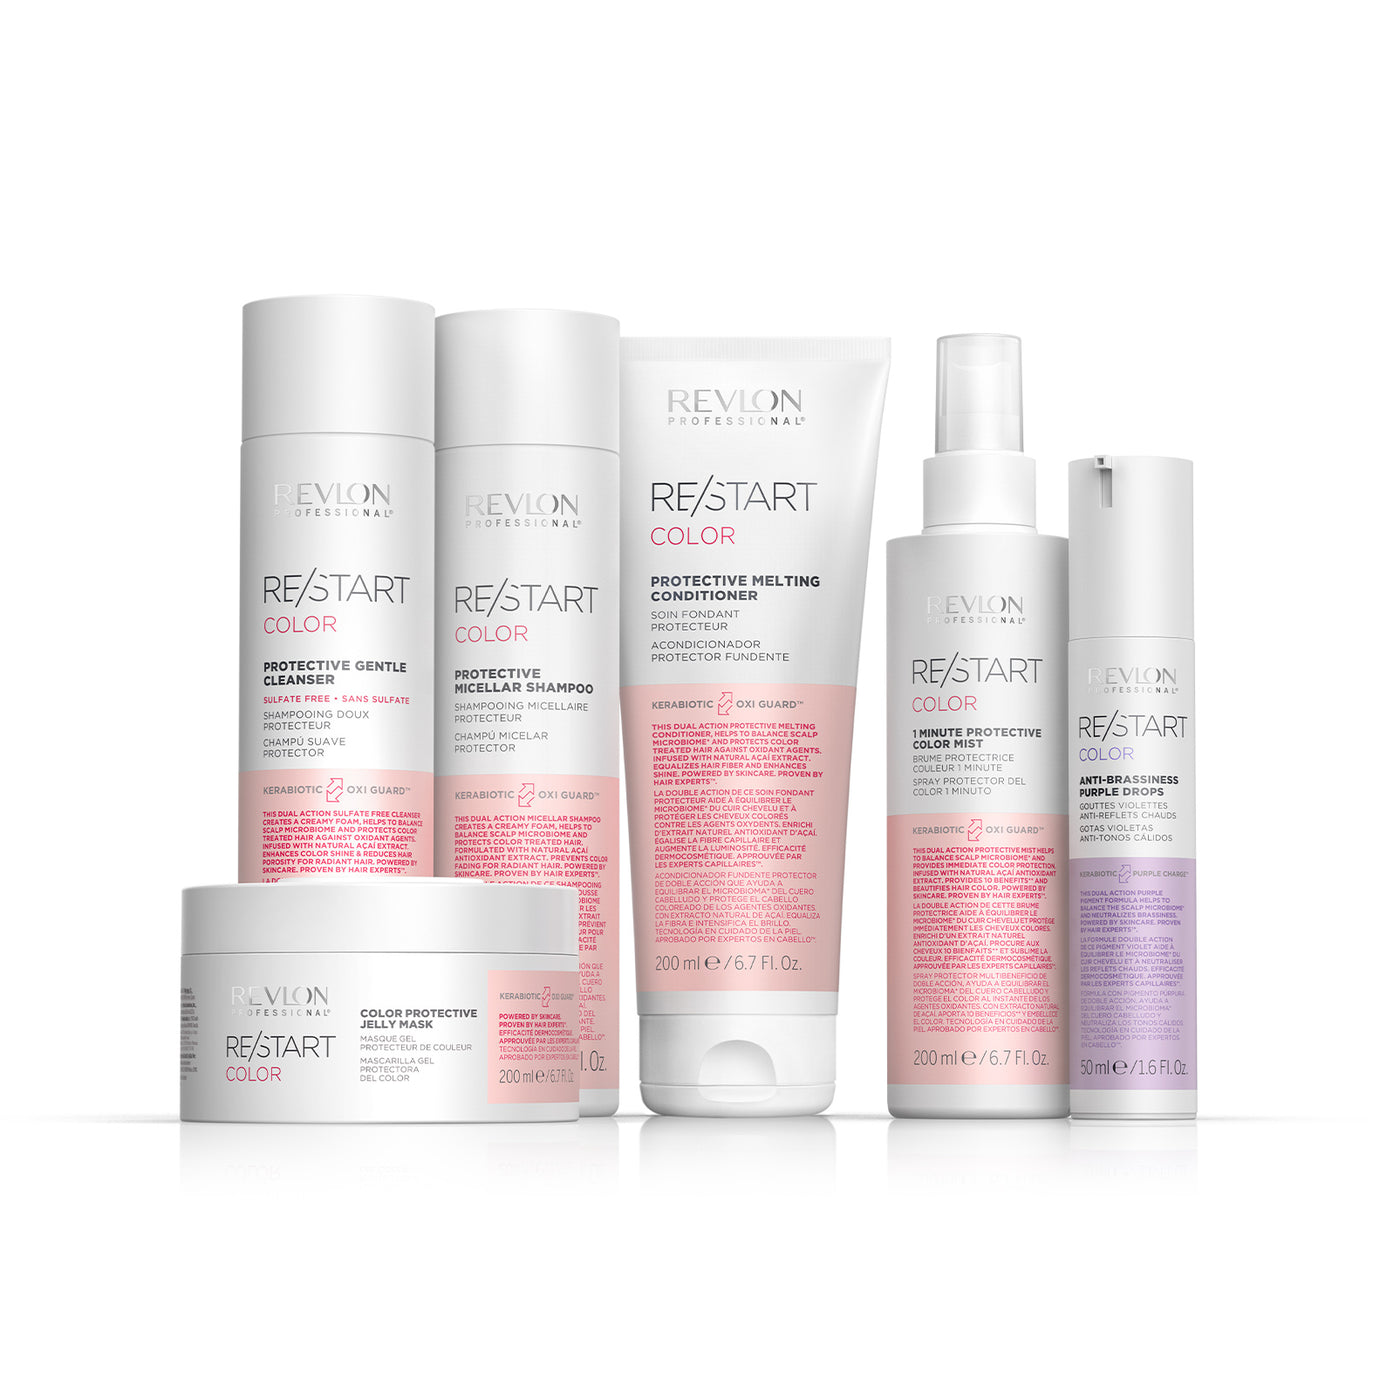 RE/START™ COLOR PROTECTIVE MELTING CONDITIONER - 200ml